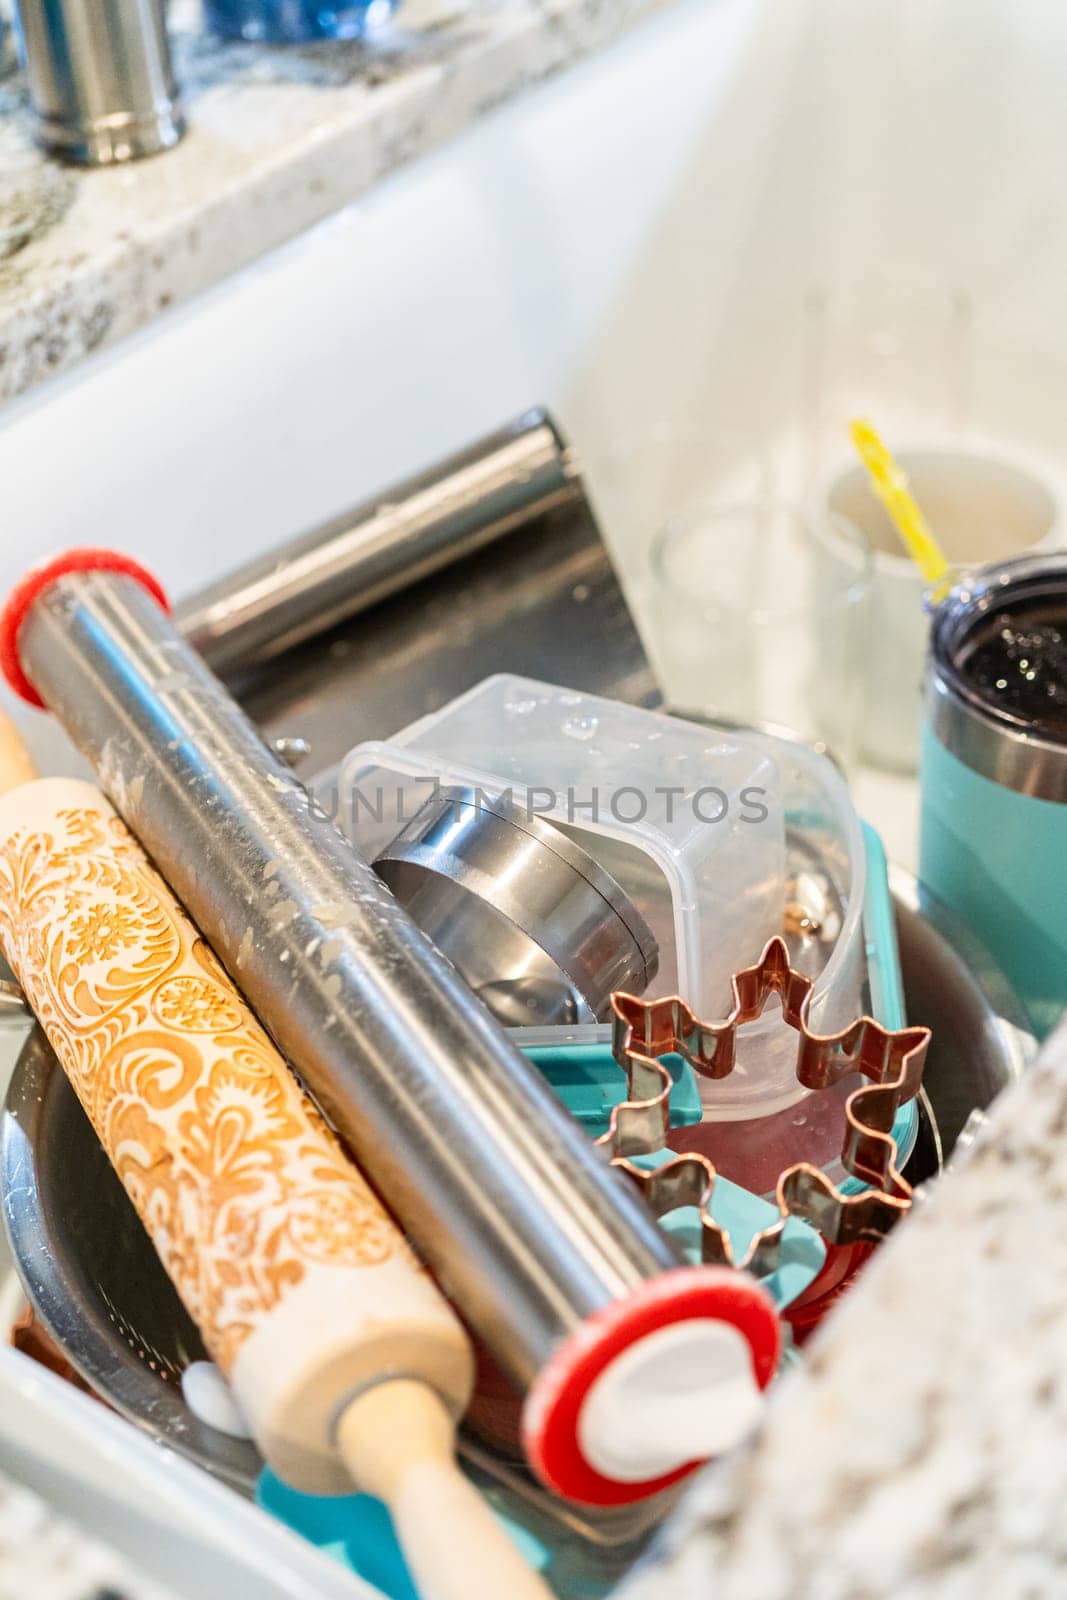 Post-Baking Cleanup: Dirty Dishes in the Sink by arinahabich